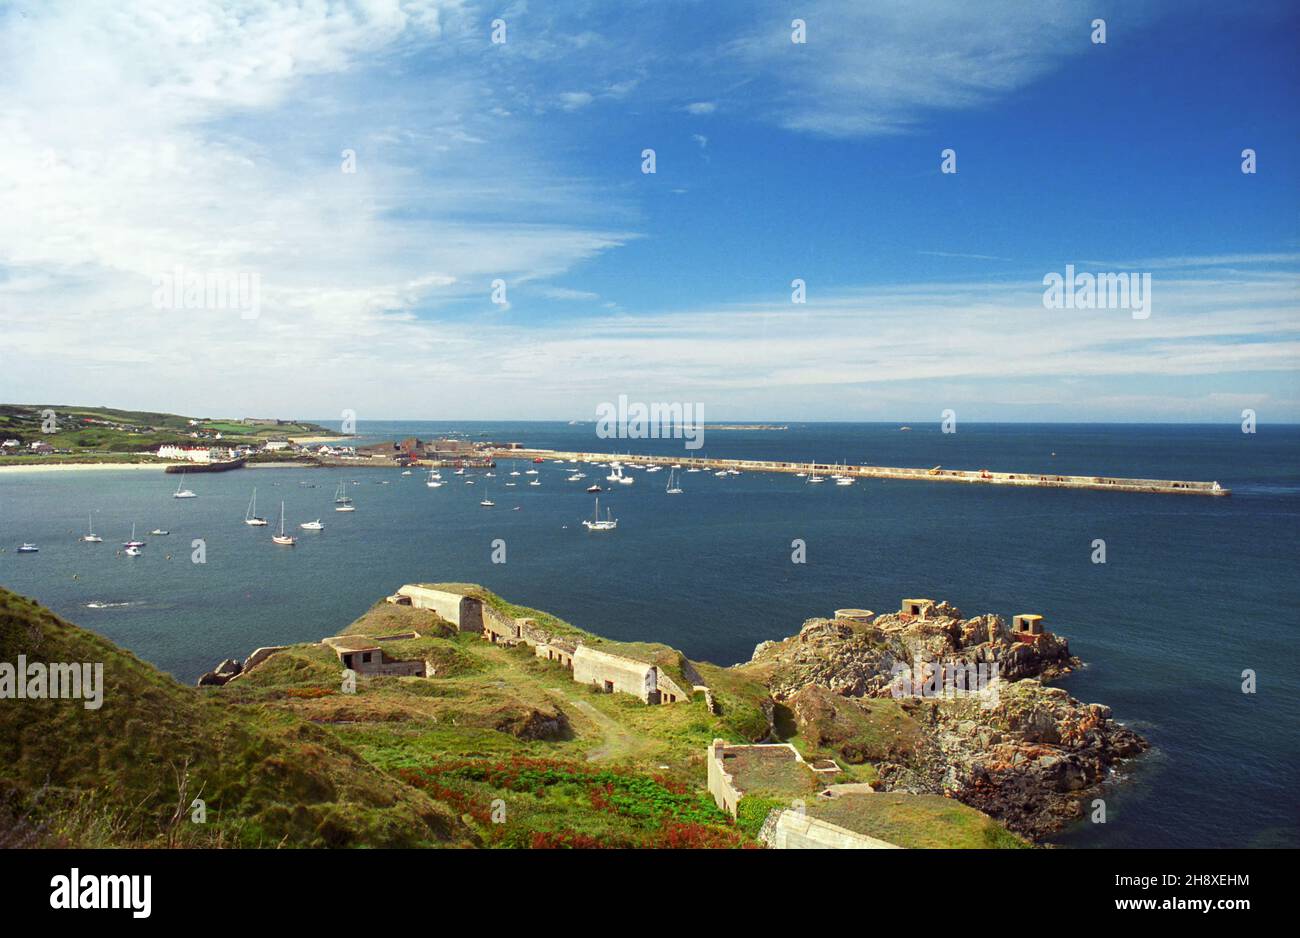 Fort Albert, Roselle Point and Braye Harbour with its great sea wall, Alderney, Channel Islands.  Film photograph, 2006 Stock Photo